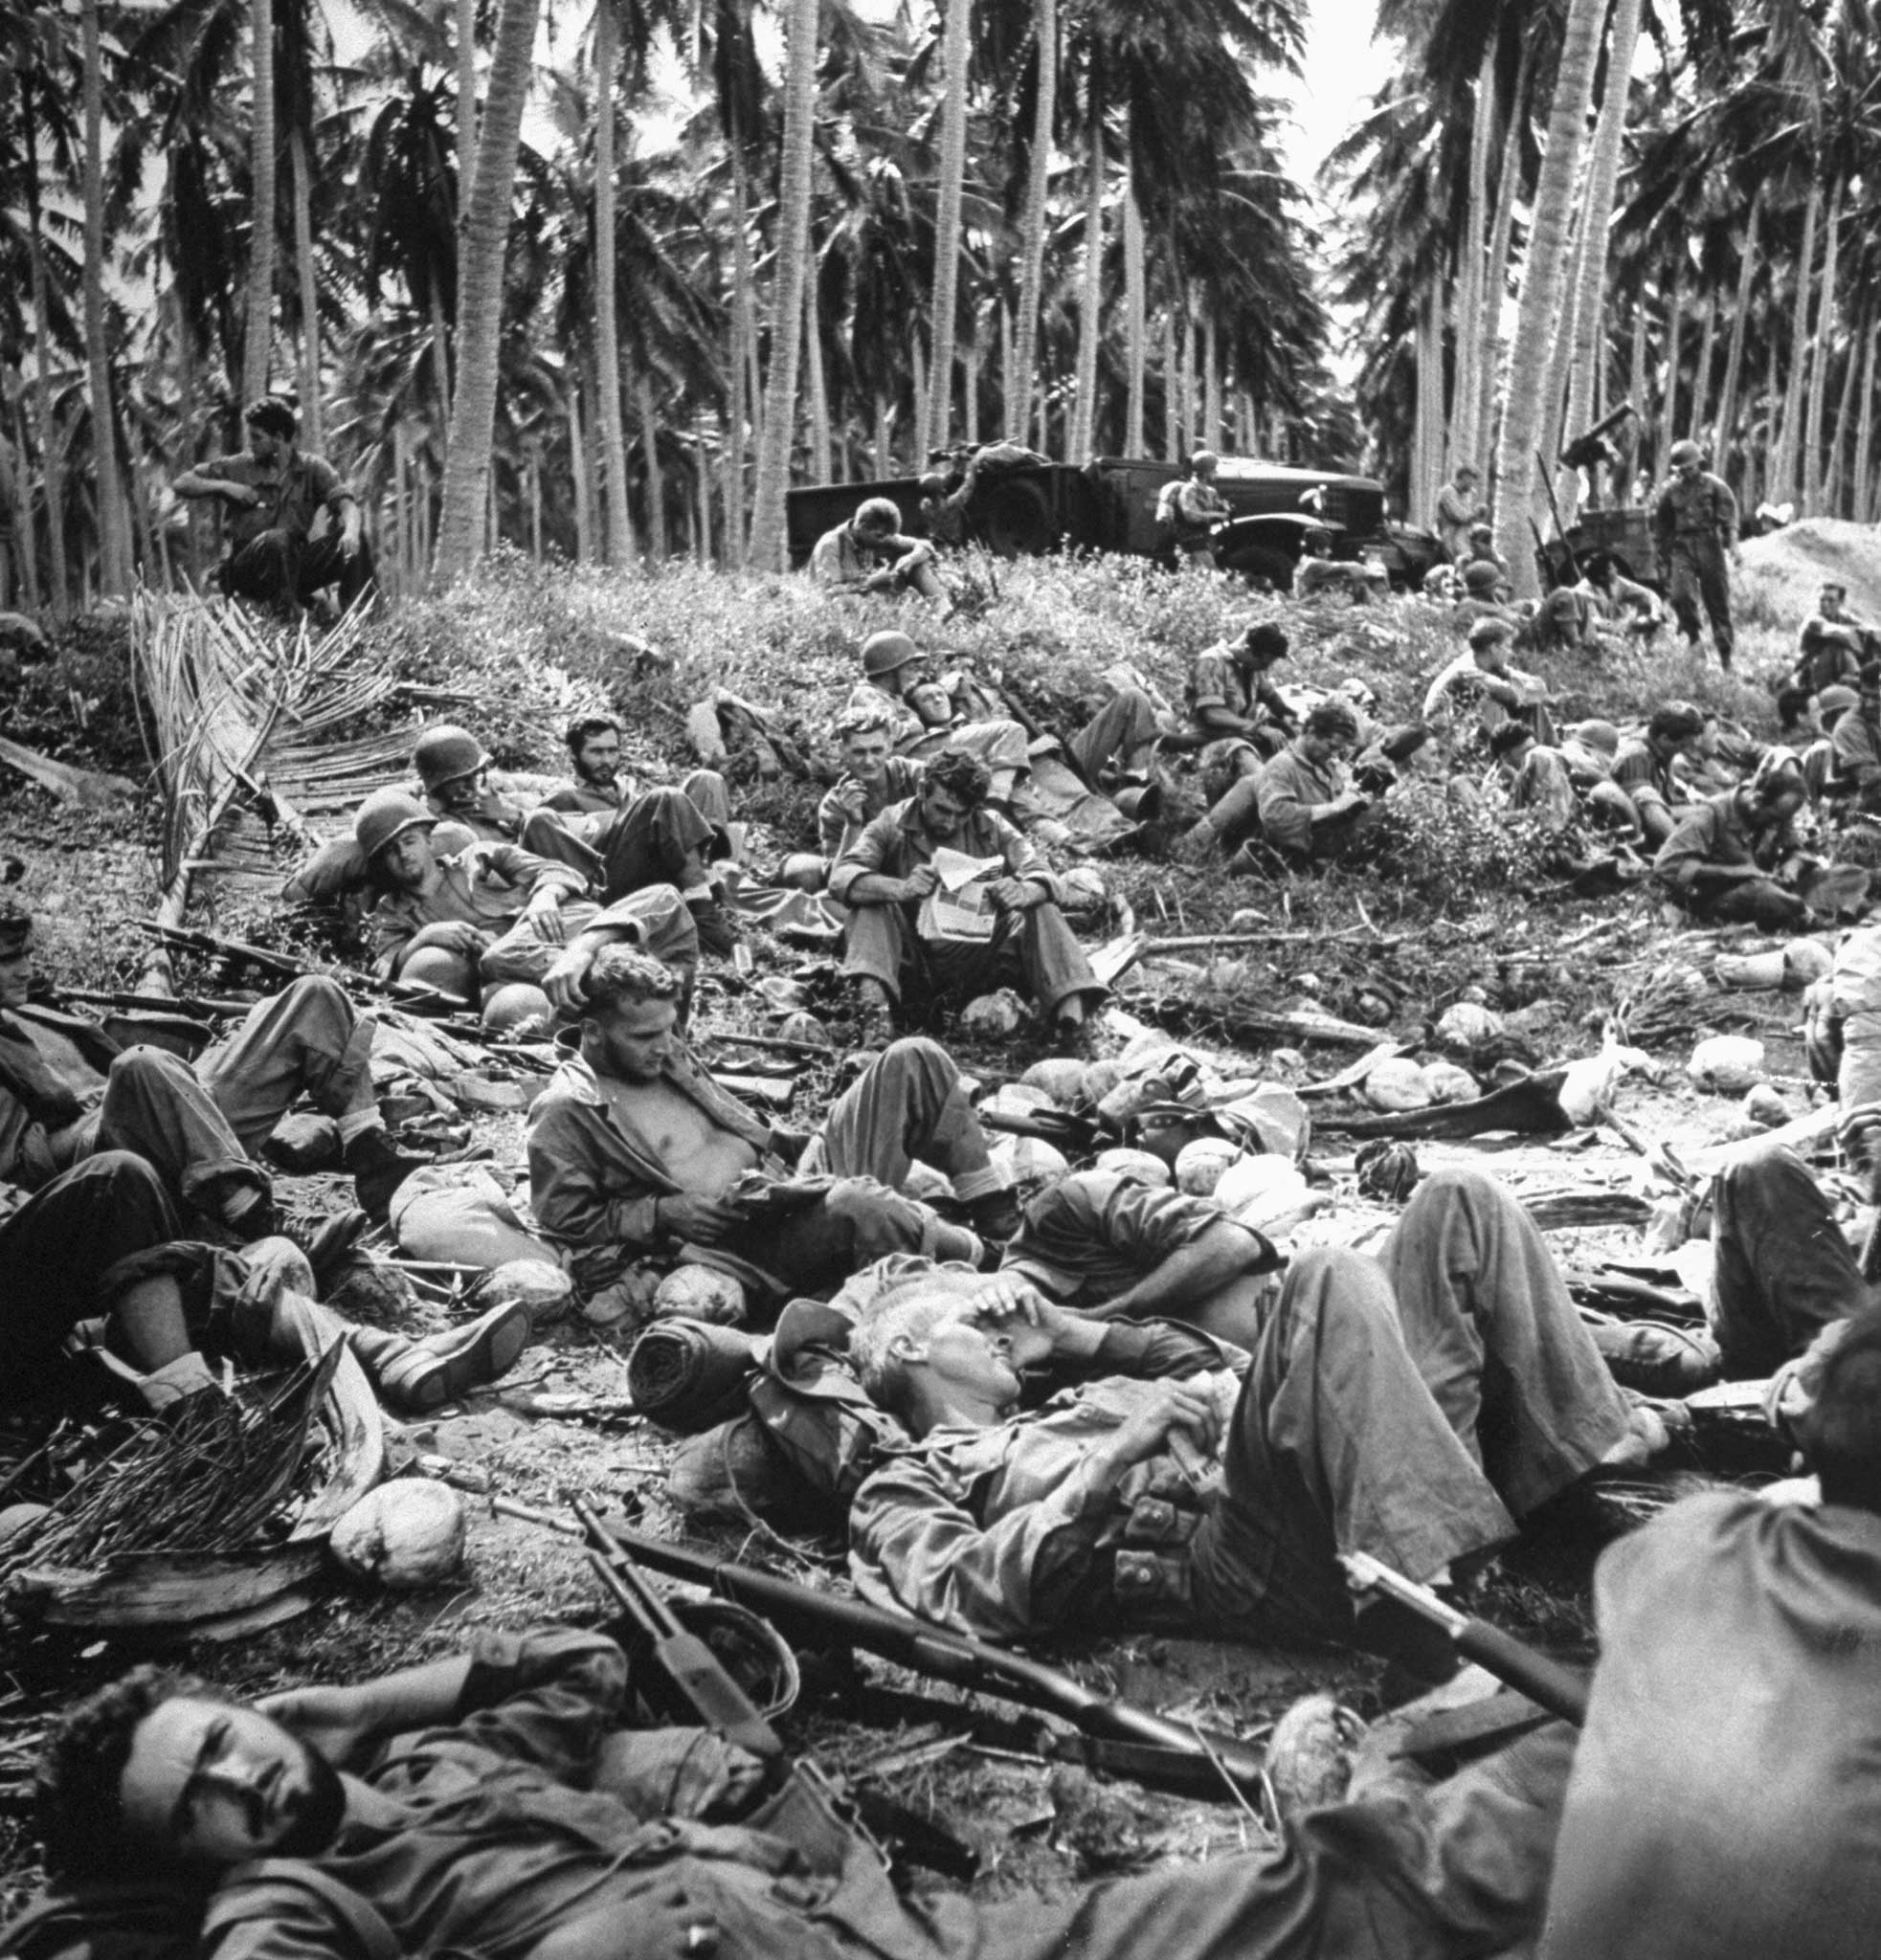 Exhausted U.S. Marines sprawl on the beach while waiting for landing craft to take them off Guadalcanal following four months of fighting the Japanese.